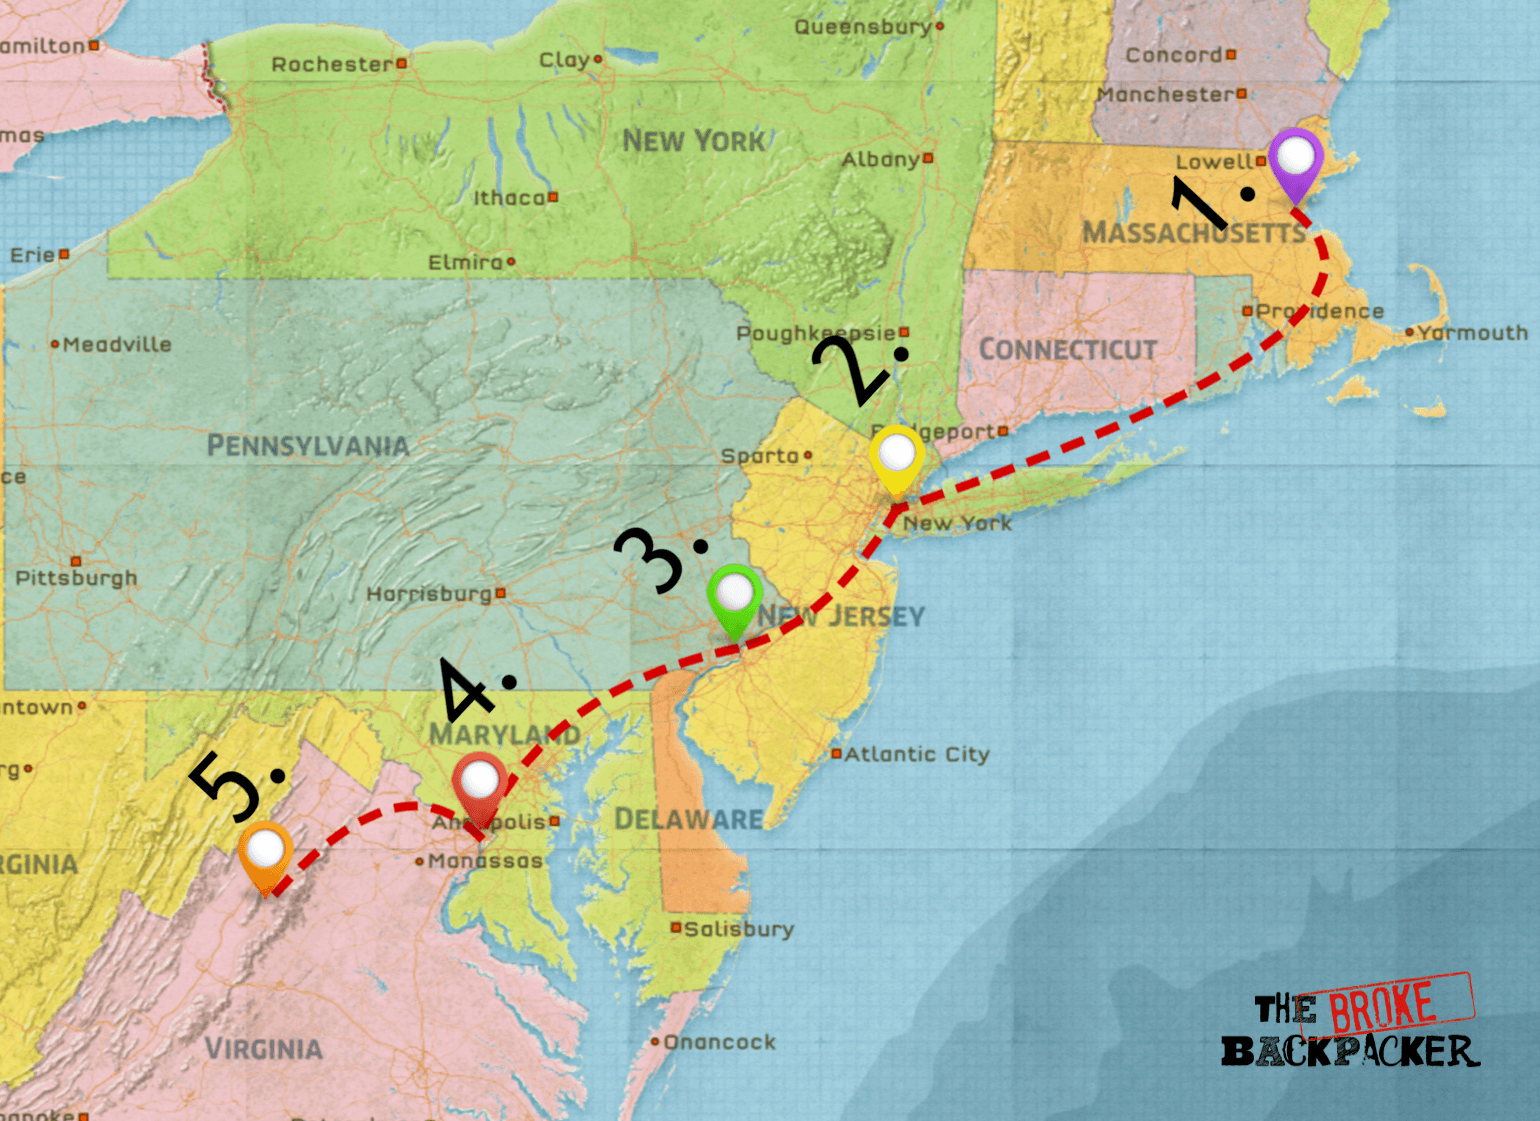 east coast road trip map - driving itinerary #1